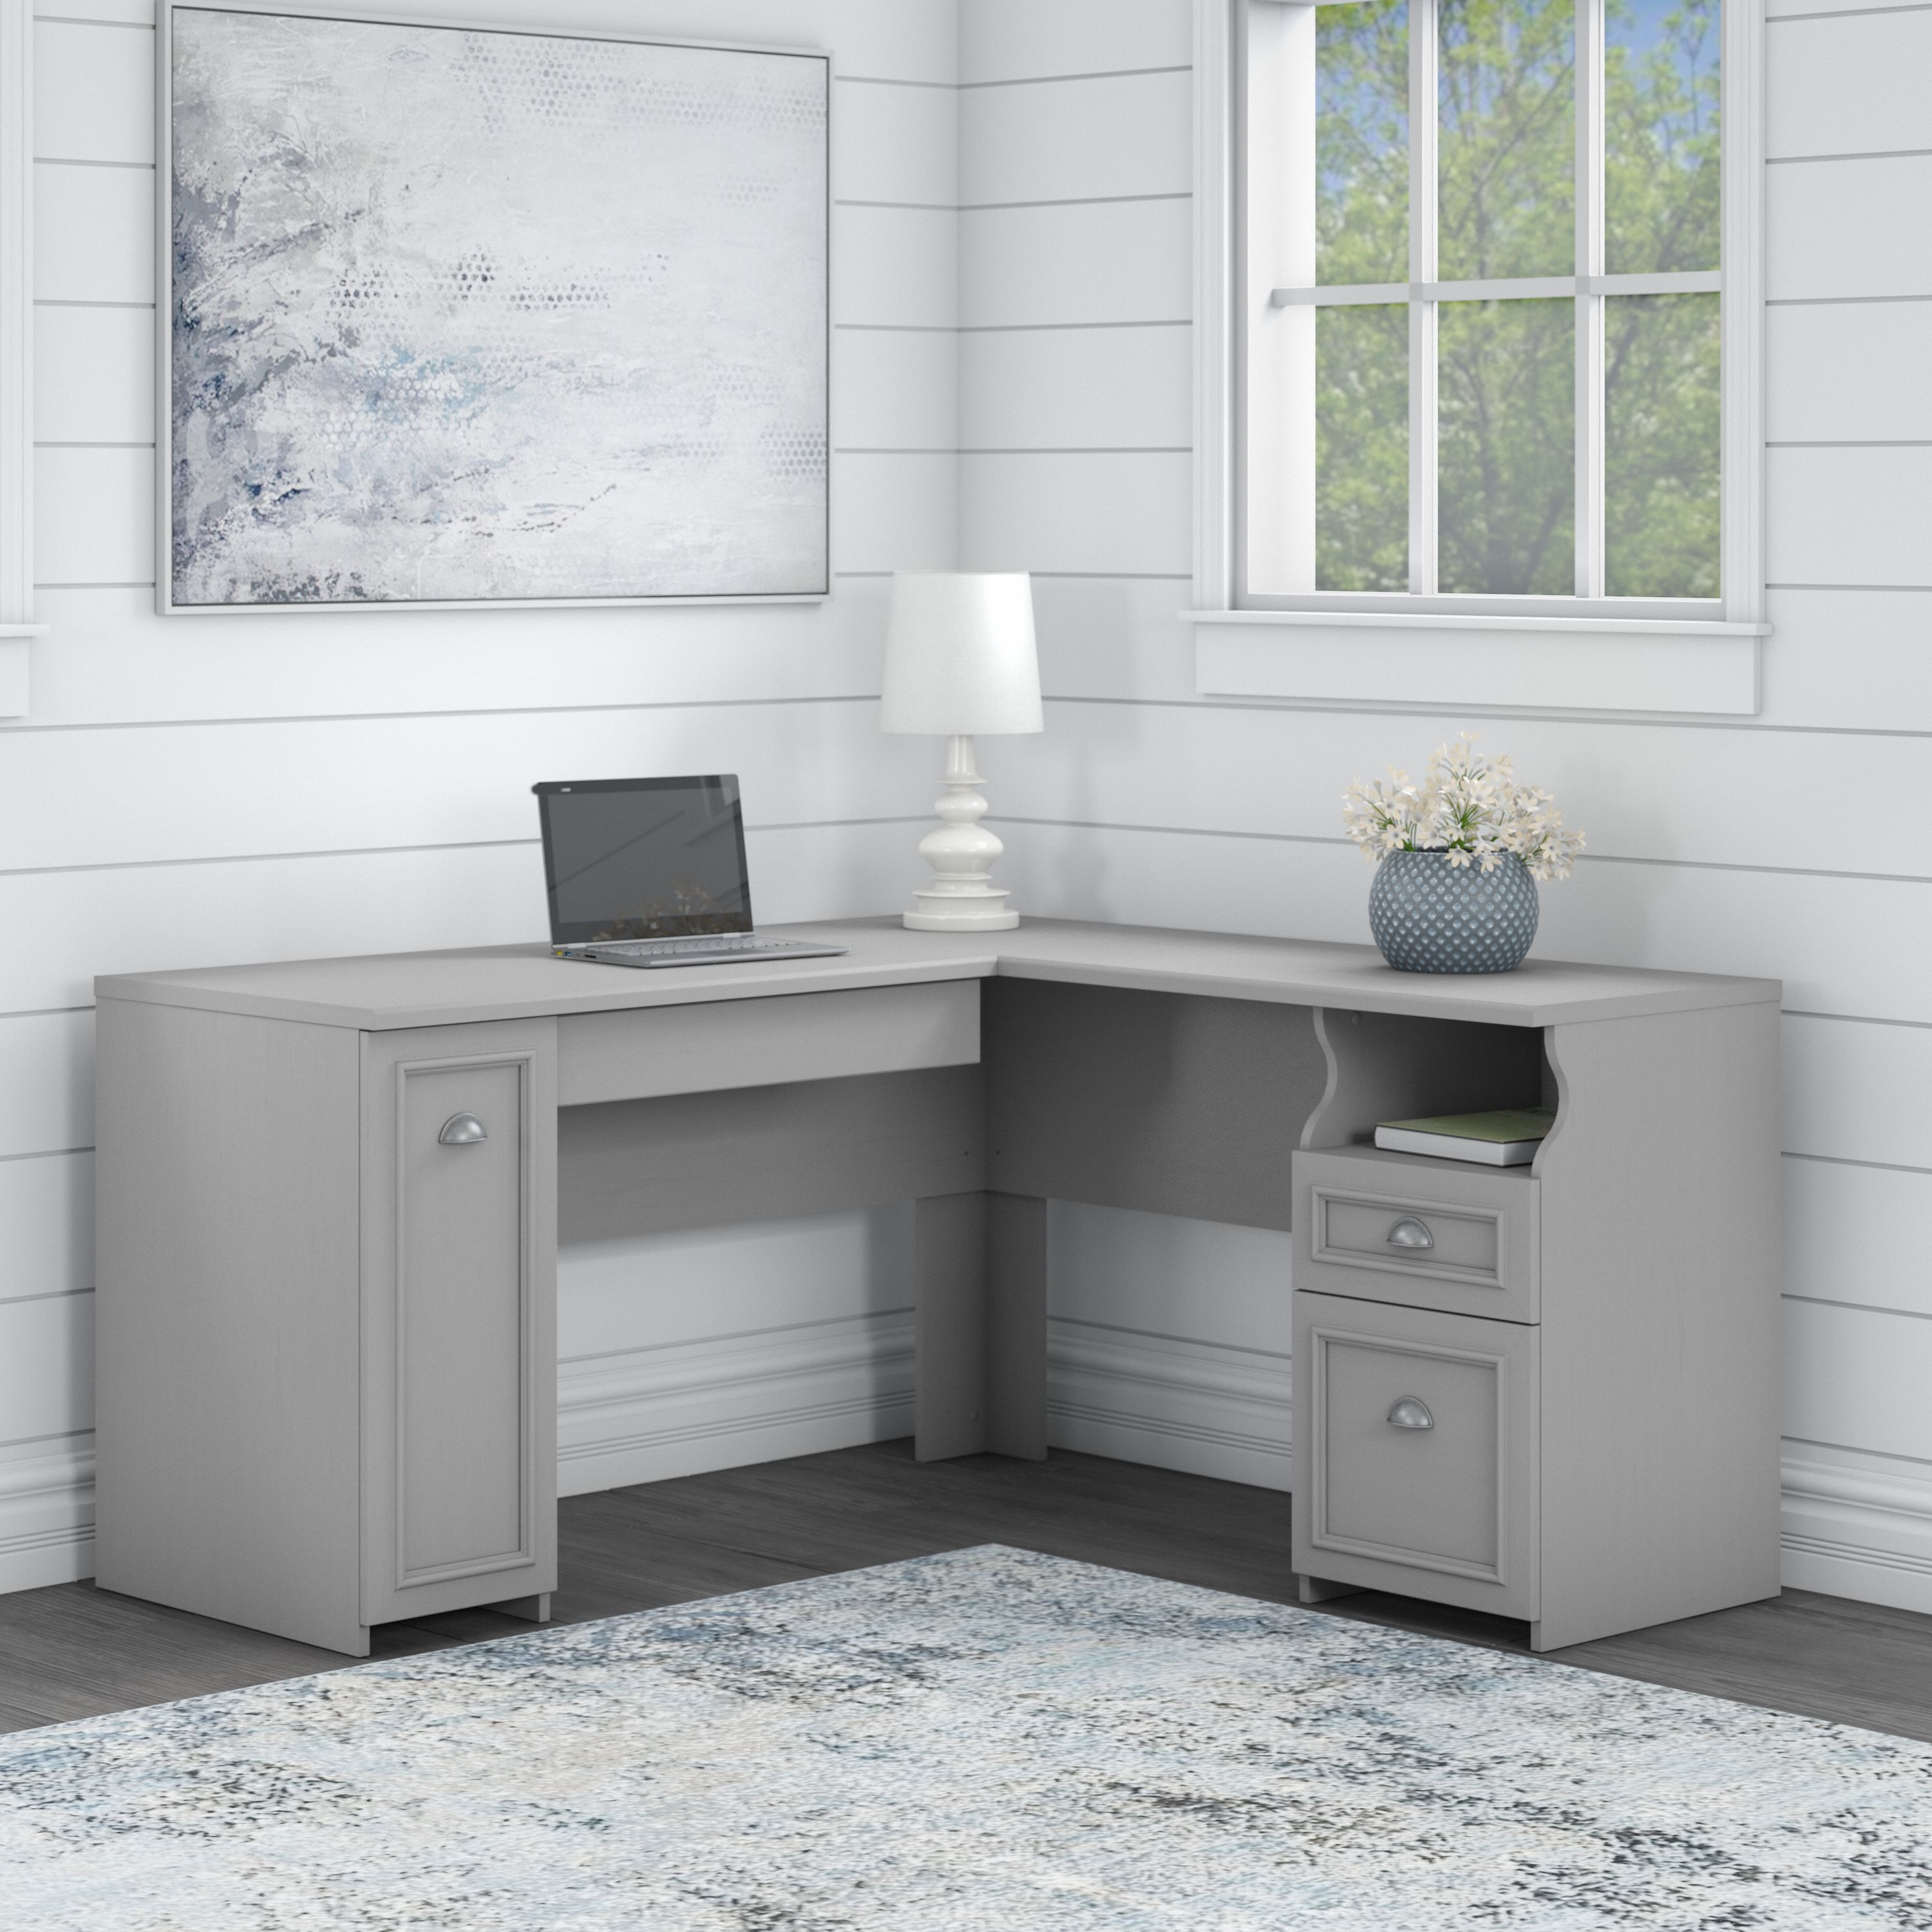 Shop Bush Furniture Fairview 60W L Shaped Desk with Drawers and Storage Cabinet 01 WC53530-03K #color_cape cod gray